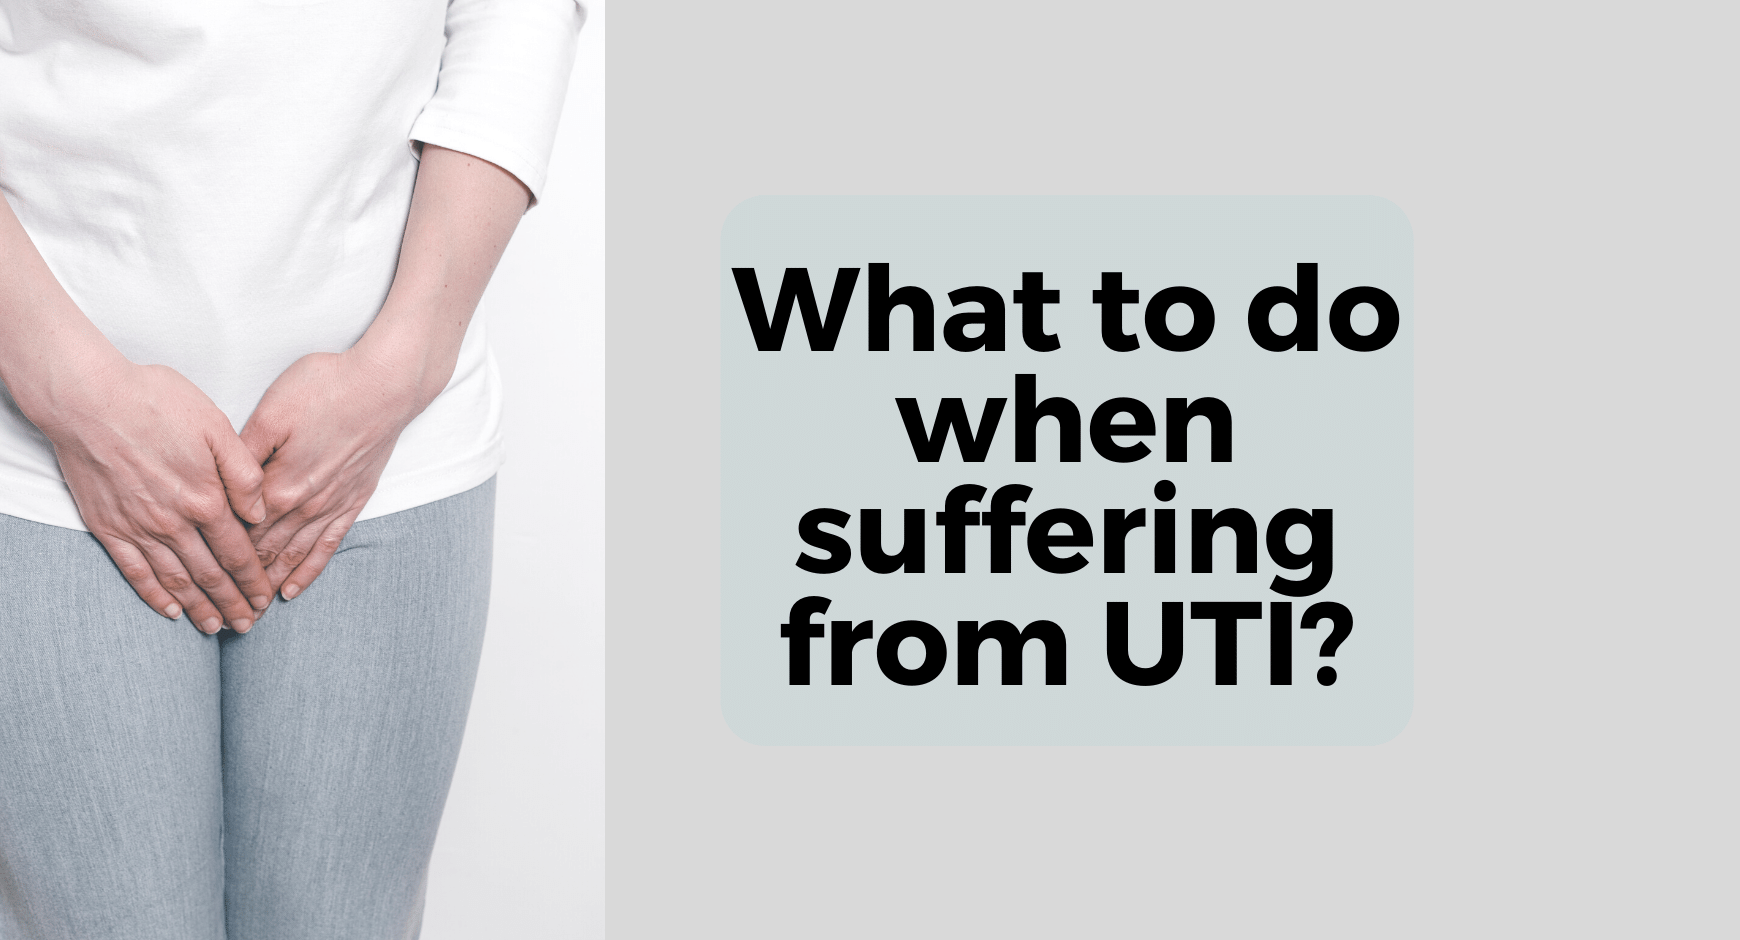 What to do when suffering from UTI?